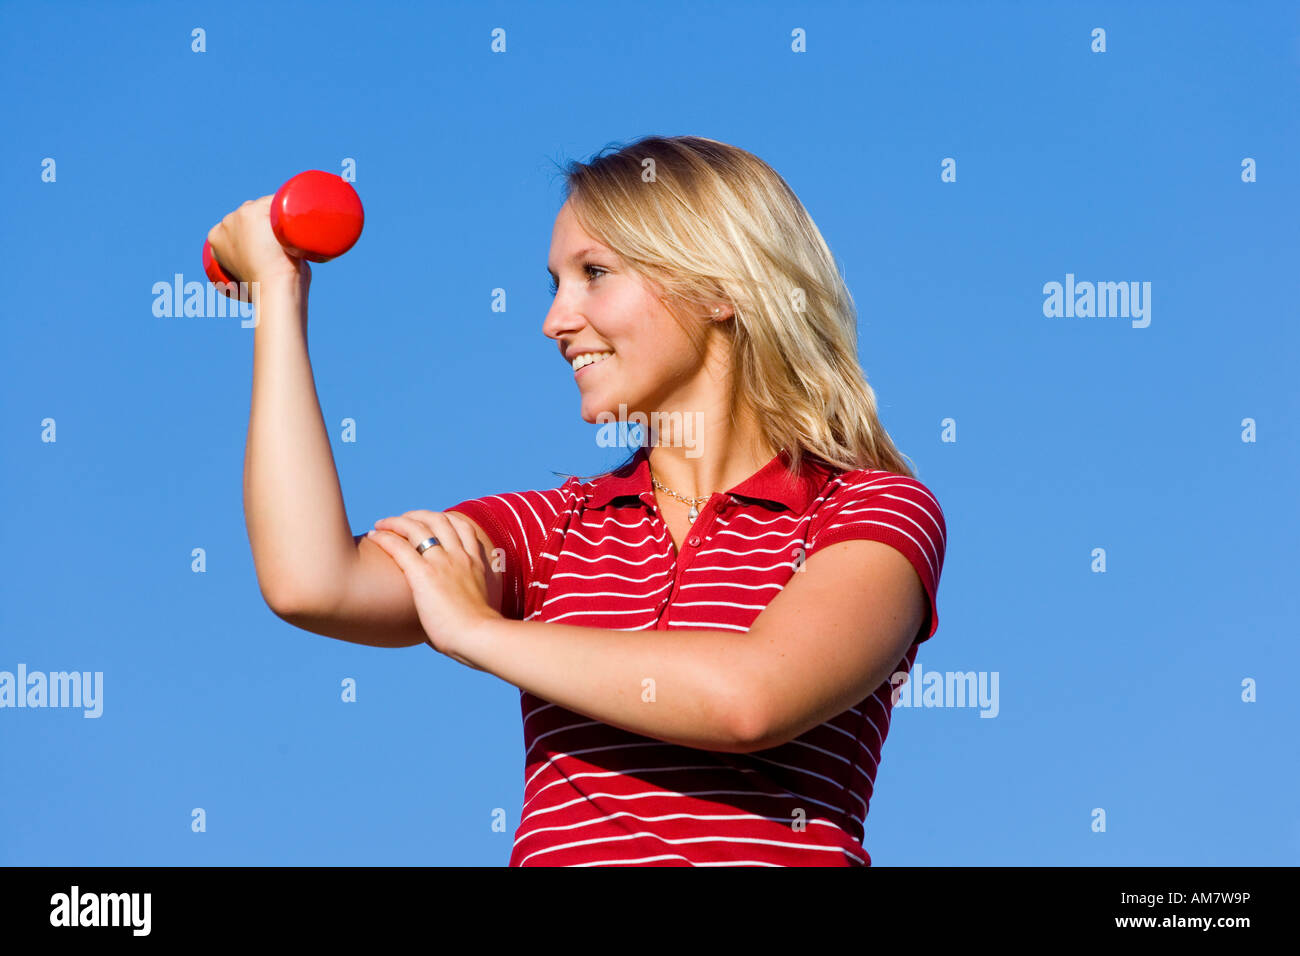 A young woman, 20 years old, training with barbells Stock Photo